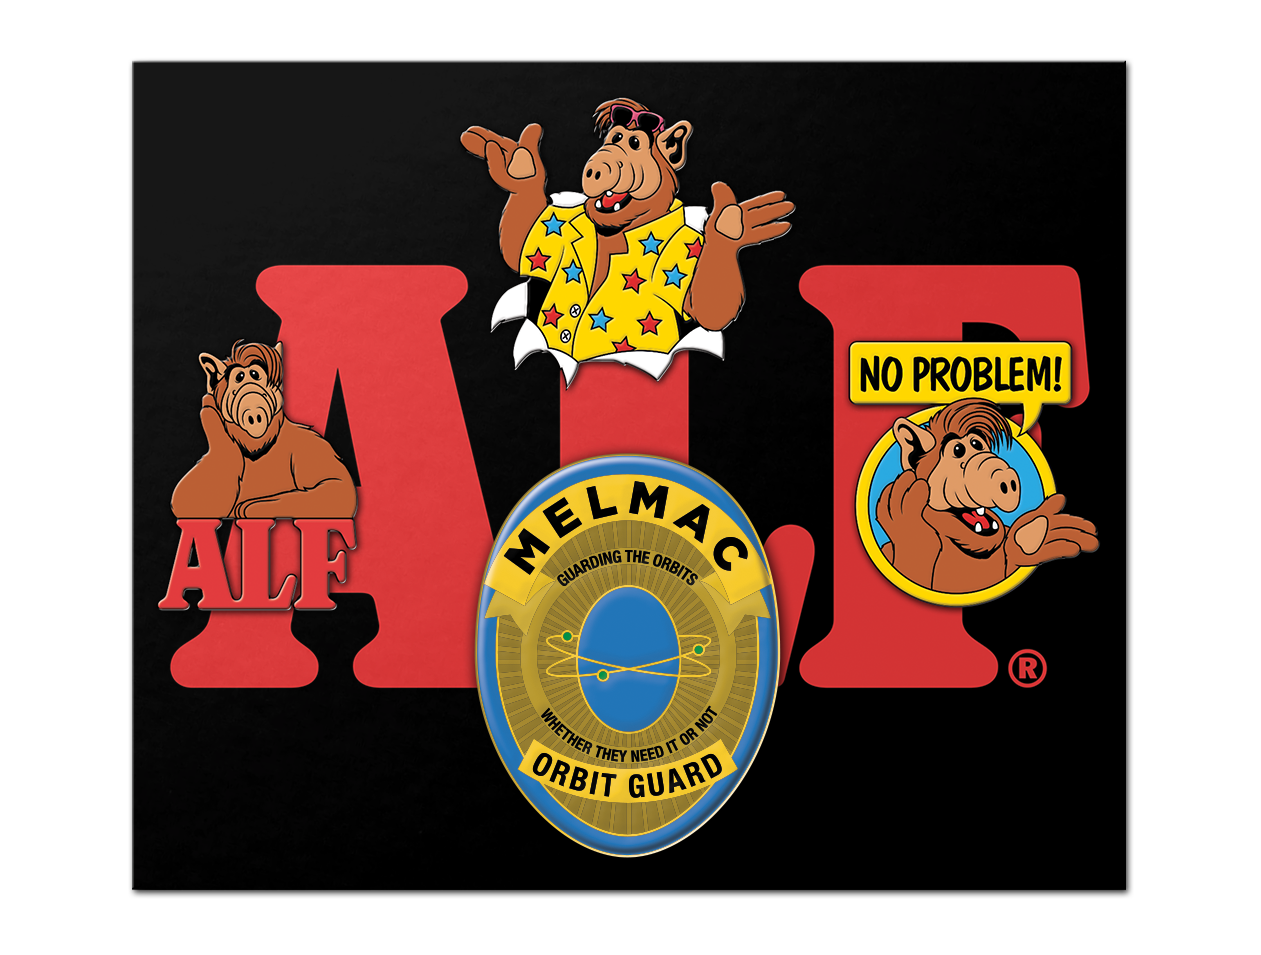 ALF: The Complete Series [Deluxe Edition] + Poster + Prism Sticker + Whisked Calico Splatter Vinyl + Enamel Pins + Lunch Box + Melmac Rock - Shout! Factory